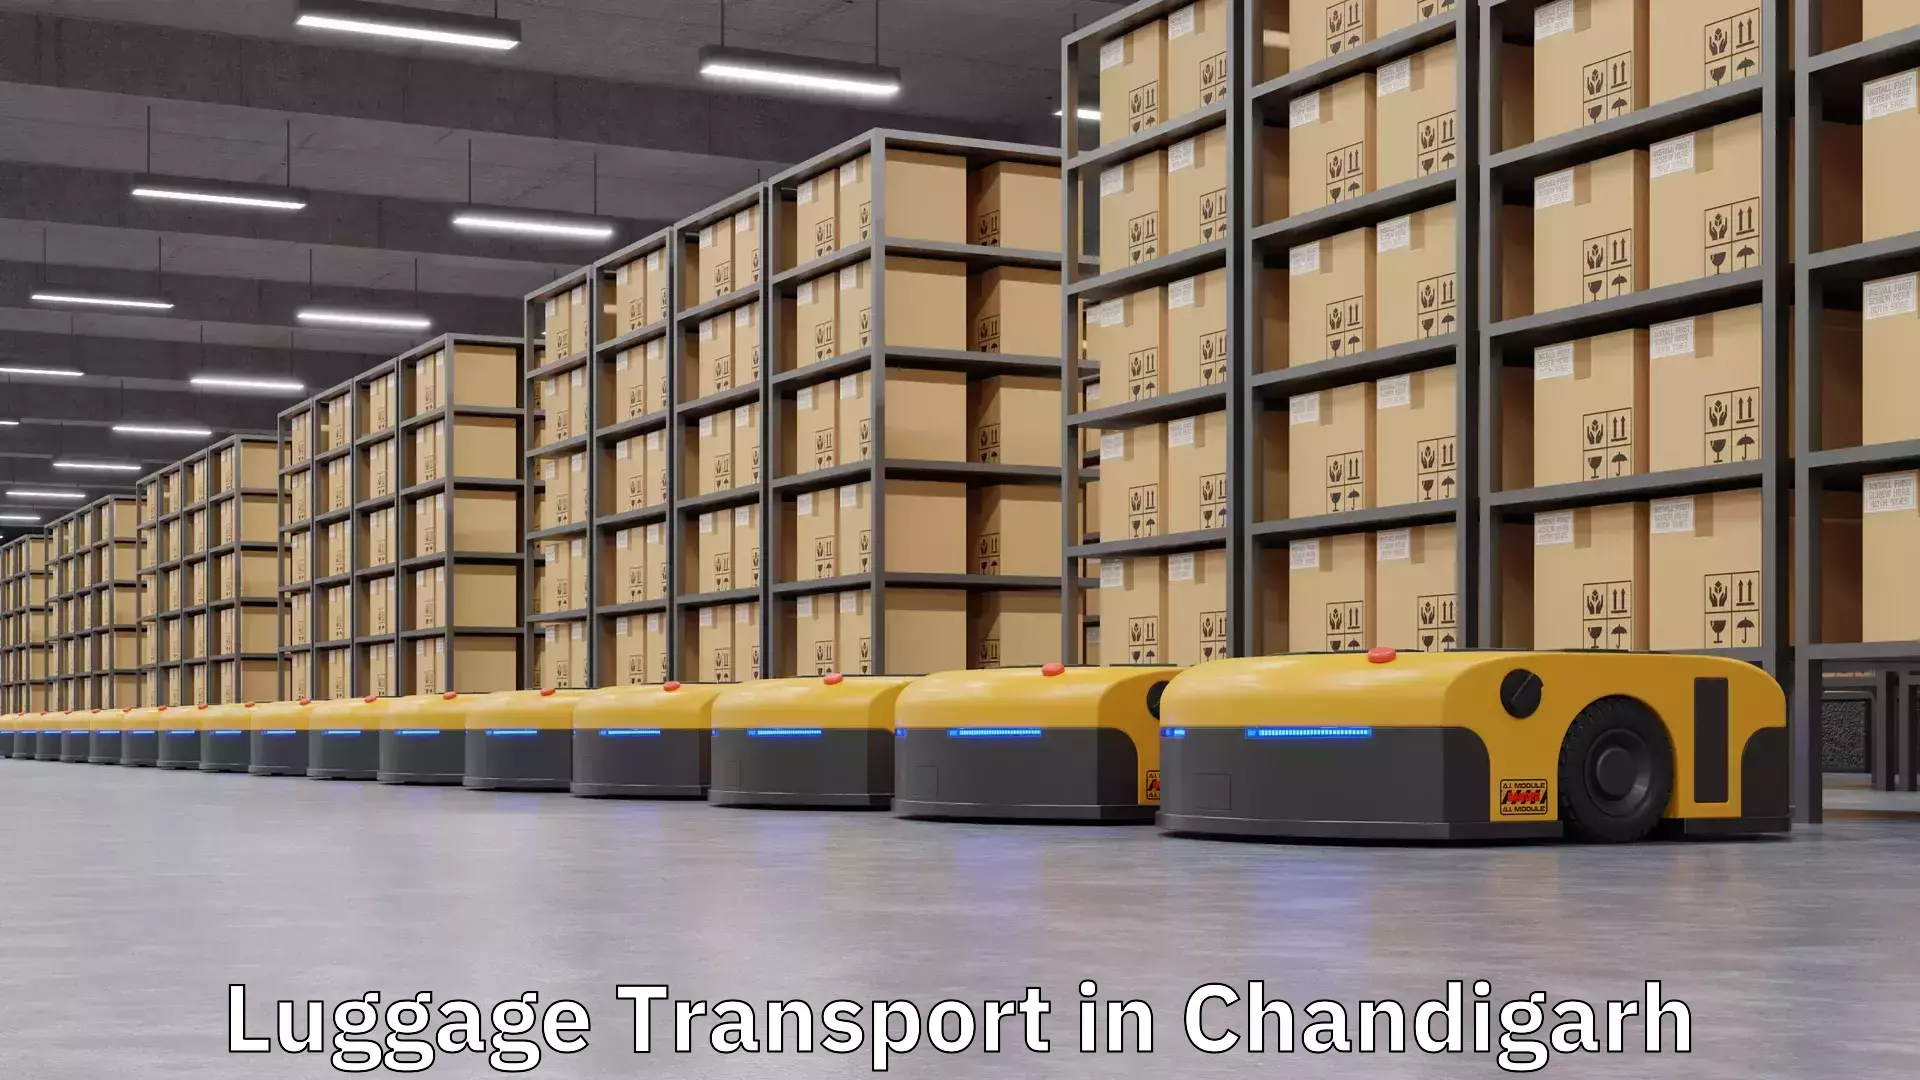 Luggage transport solutions in Chandigarh